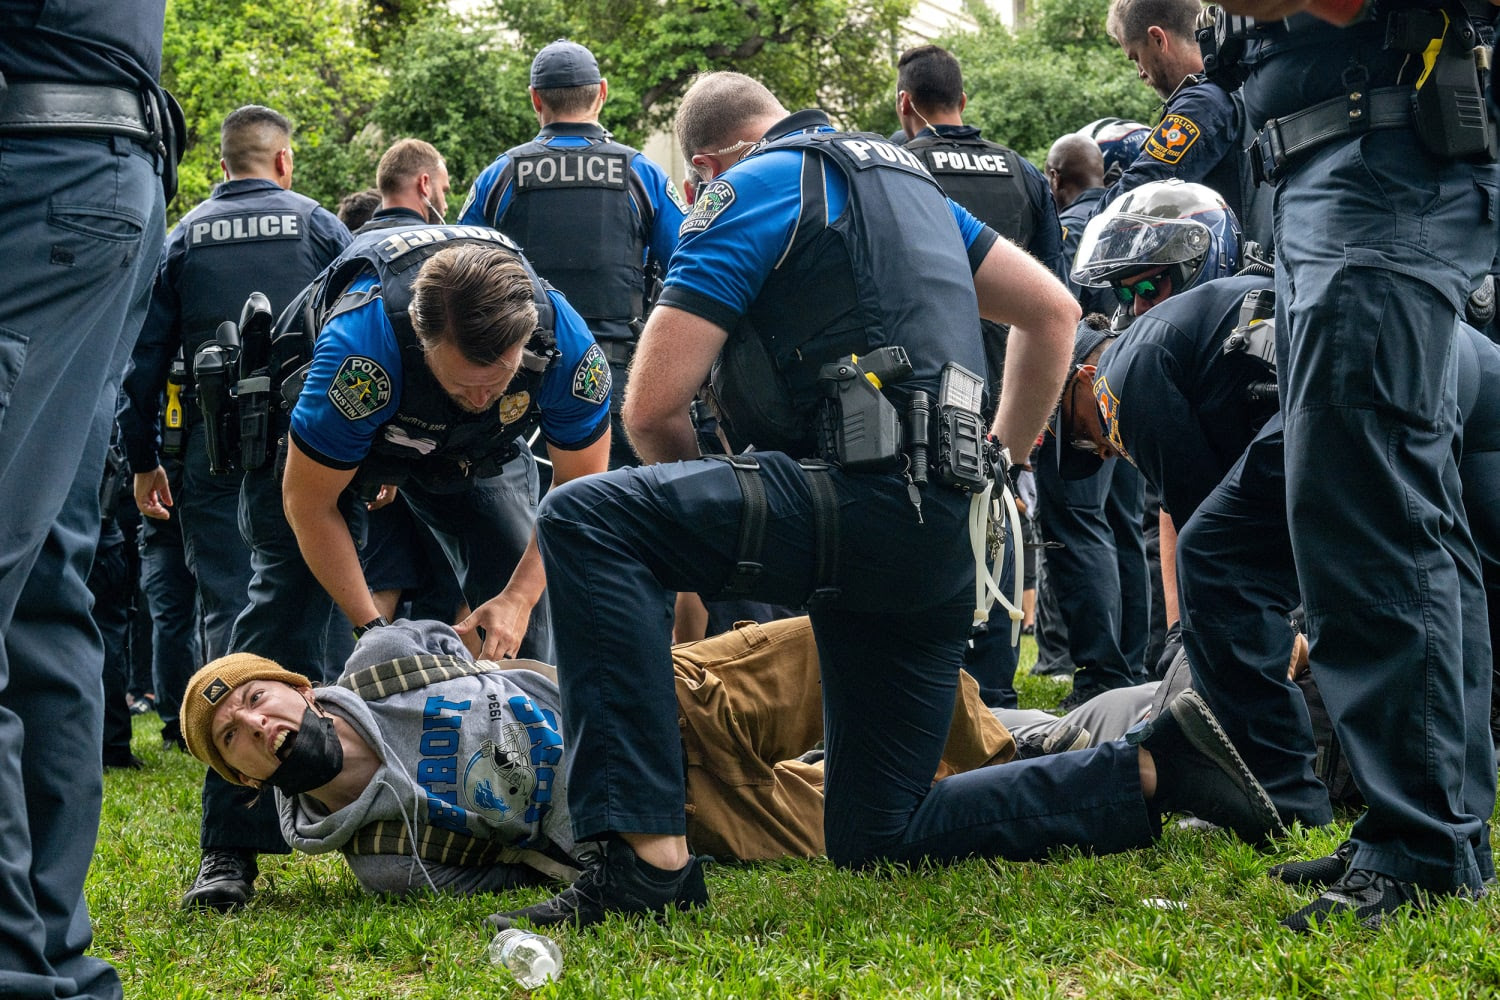 Police arrested protesters at USC and Texas, as pro-Palestinian rallies spread to more campuses. 240424-austin-texas-police-arrest-student-protest-ac-1009p-7d35b9